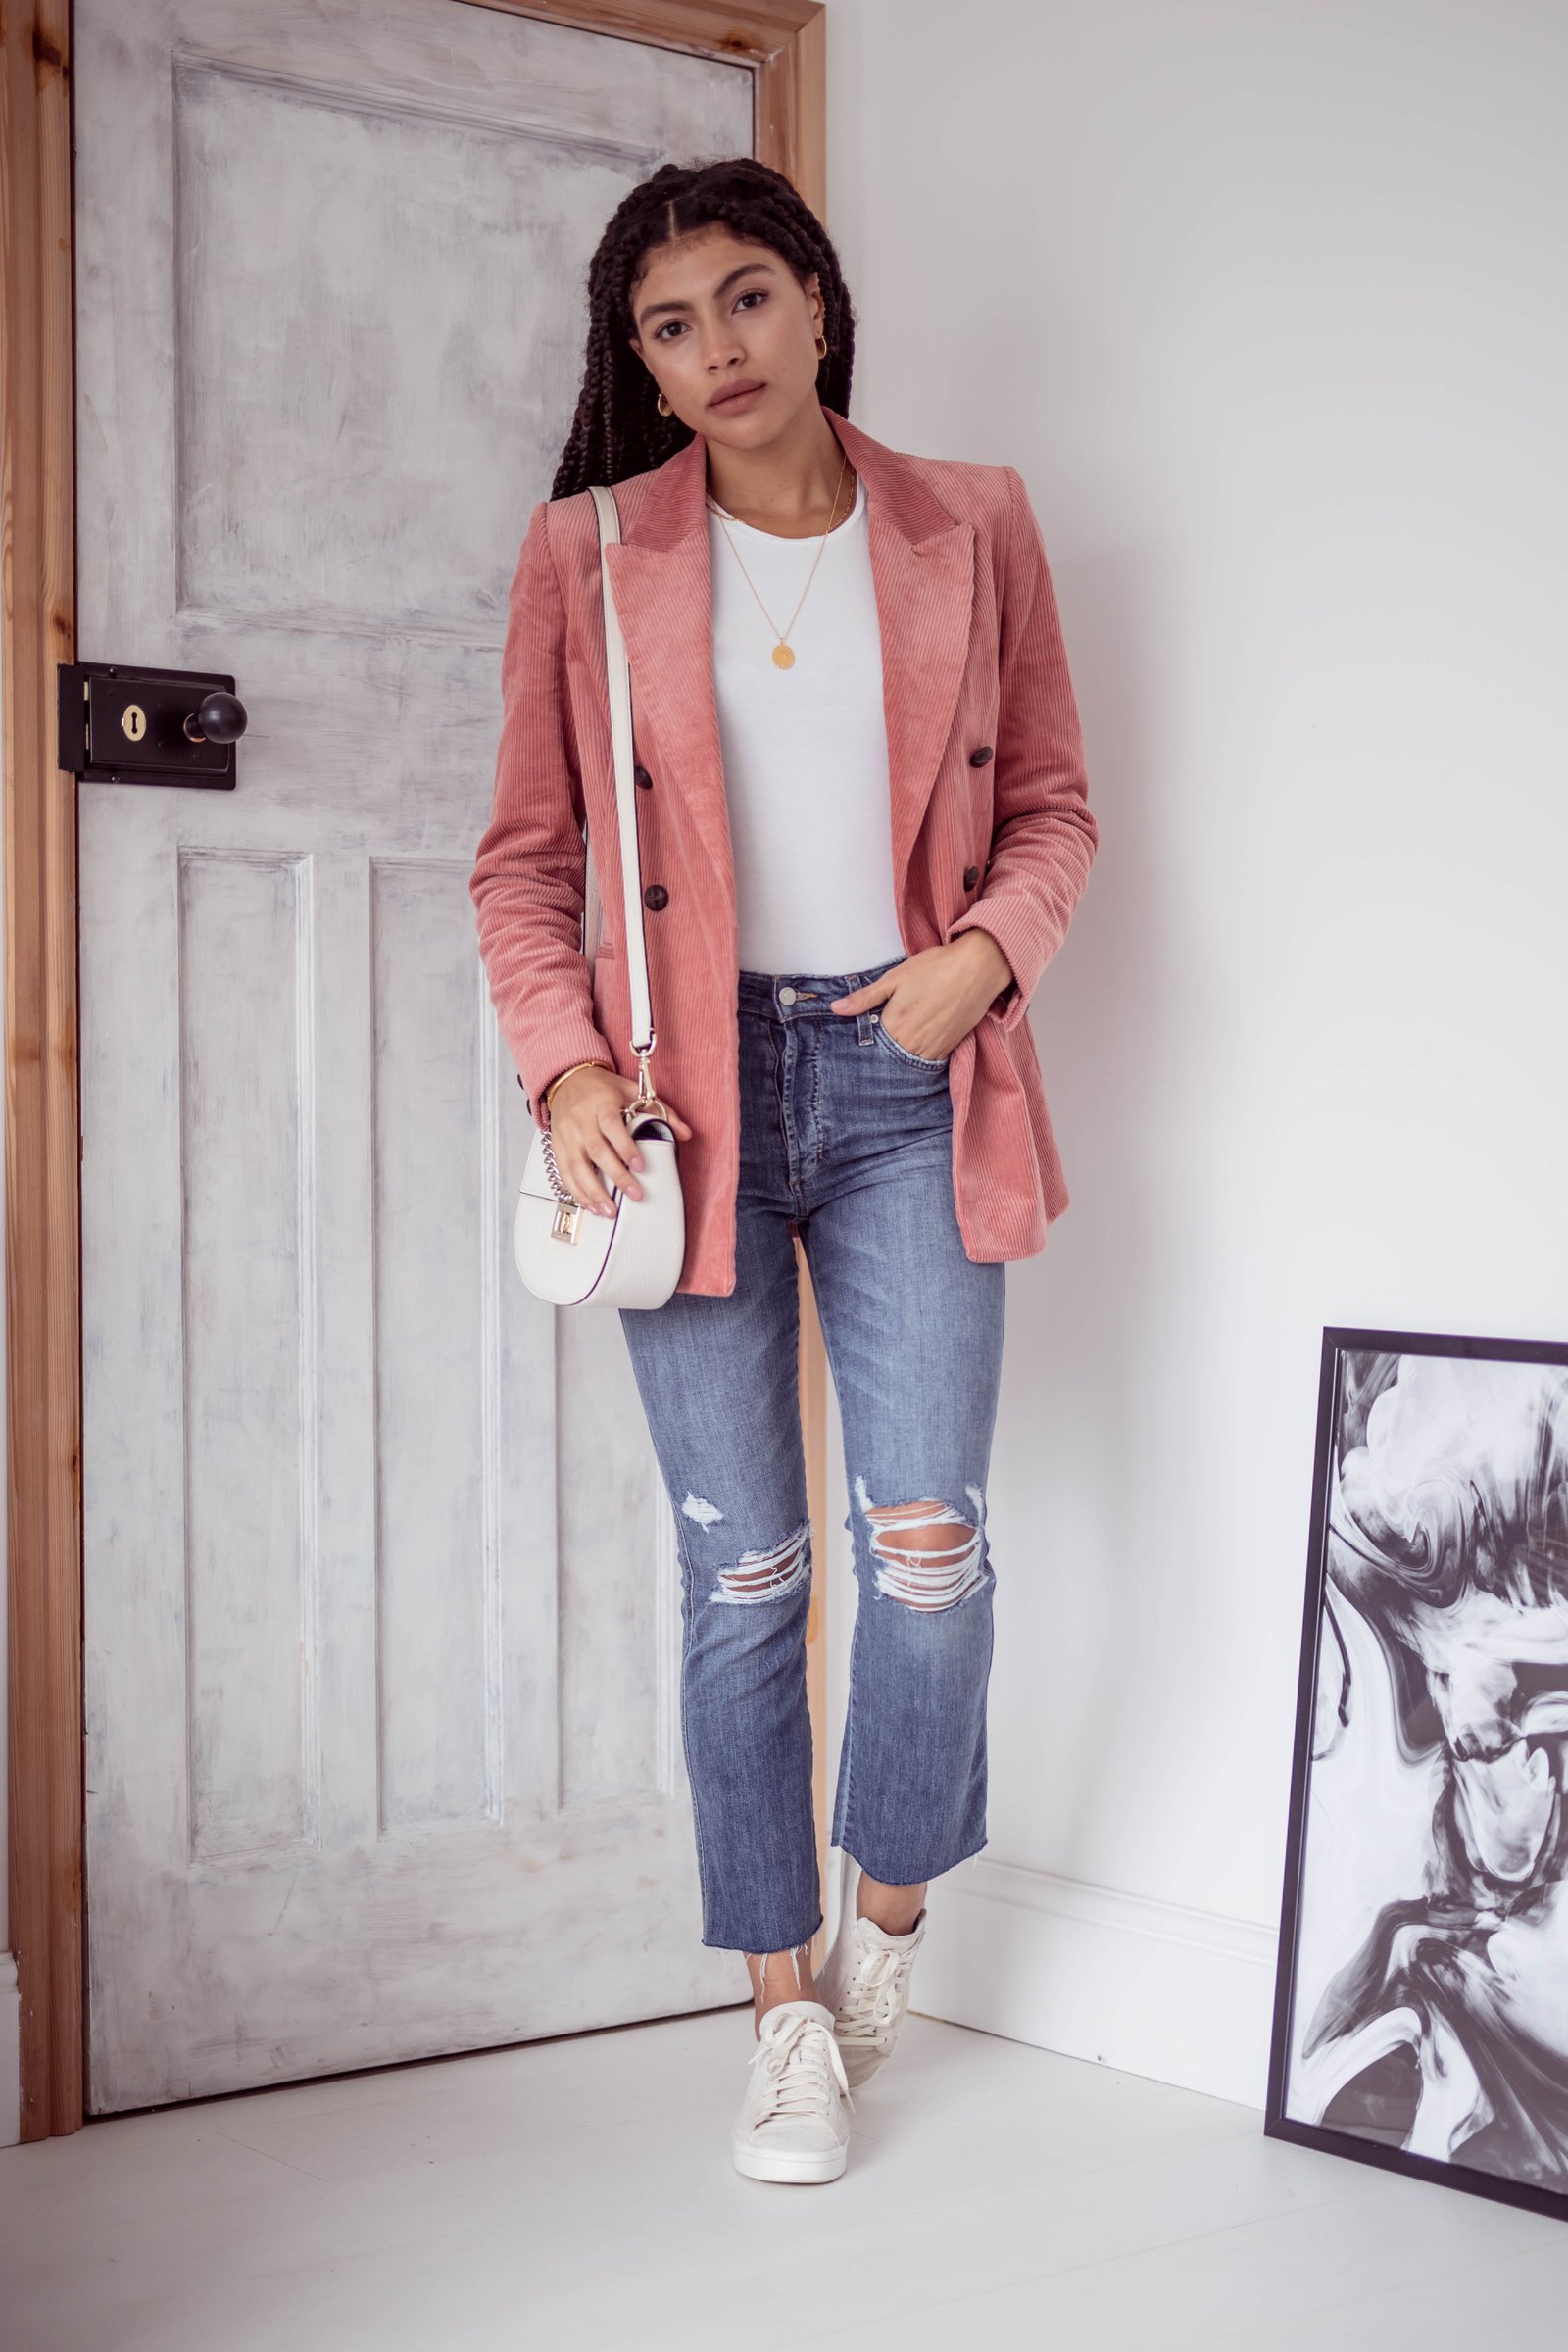 Casual Everyday cropped denim jeans and pink double breasted corduroy blazer outfit